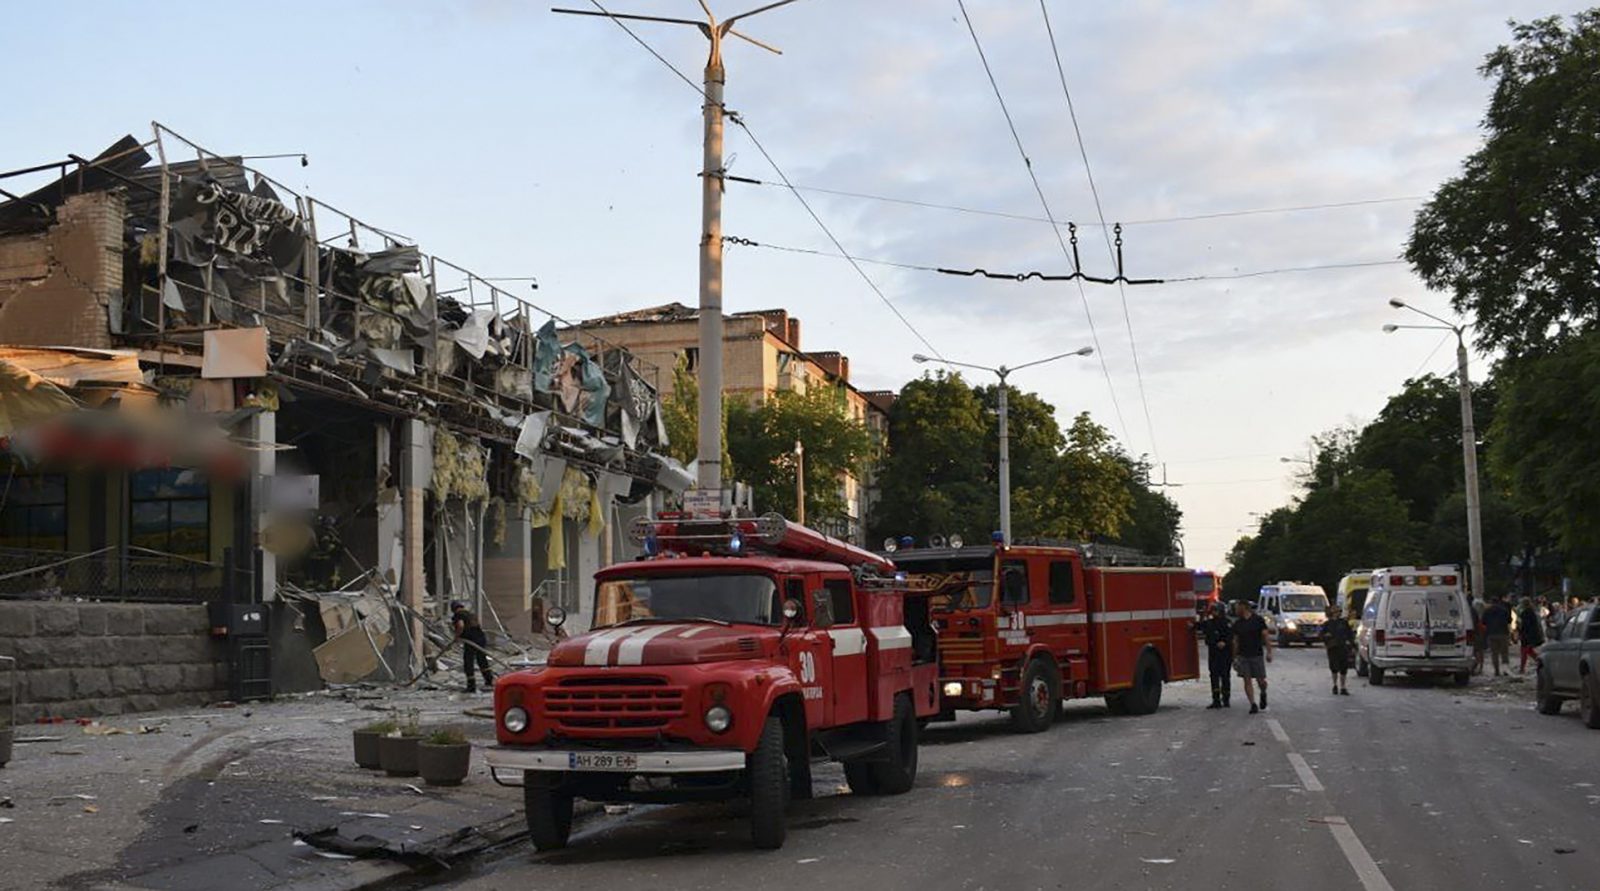 epa10714321 A handout picture made available by the National Police press service shows Ukrainian rescuers work on the site of a rocket hit in downtown Kramatorsk, Donetsk area, Ukraine, 27 June 2023 amid the Russian invasion. According the National Police report, two S300 rockets hit Kramatorsk, at least two people died and 22 others were injured. Russian troops entered Ukrainian territory in February 2022, starting a conflict that has provoked destruction and a humanitarian crisis.  EPA/National police of Ukraine / HANDOUT HANDOUT  HANDOUT EDITORIAL USE ONLY/NO SALES